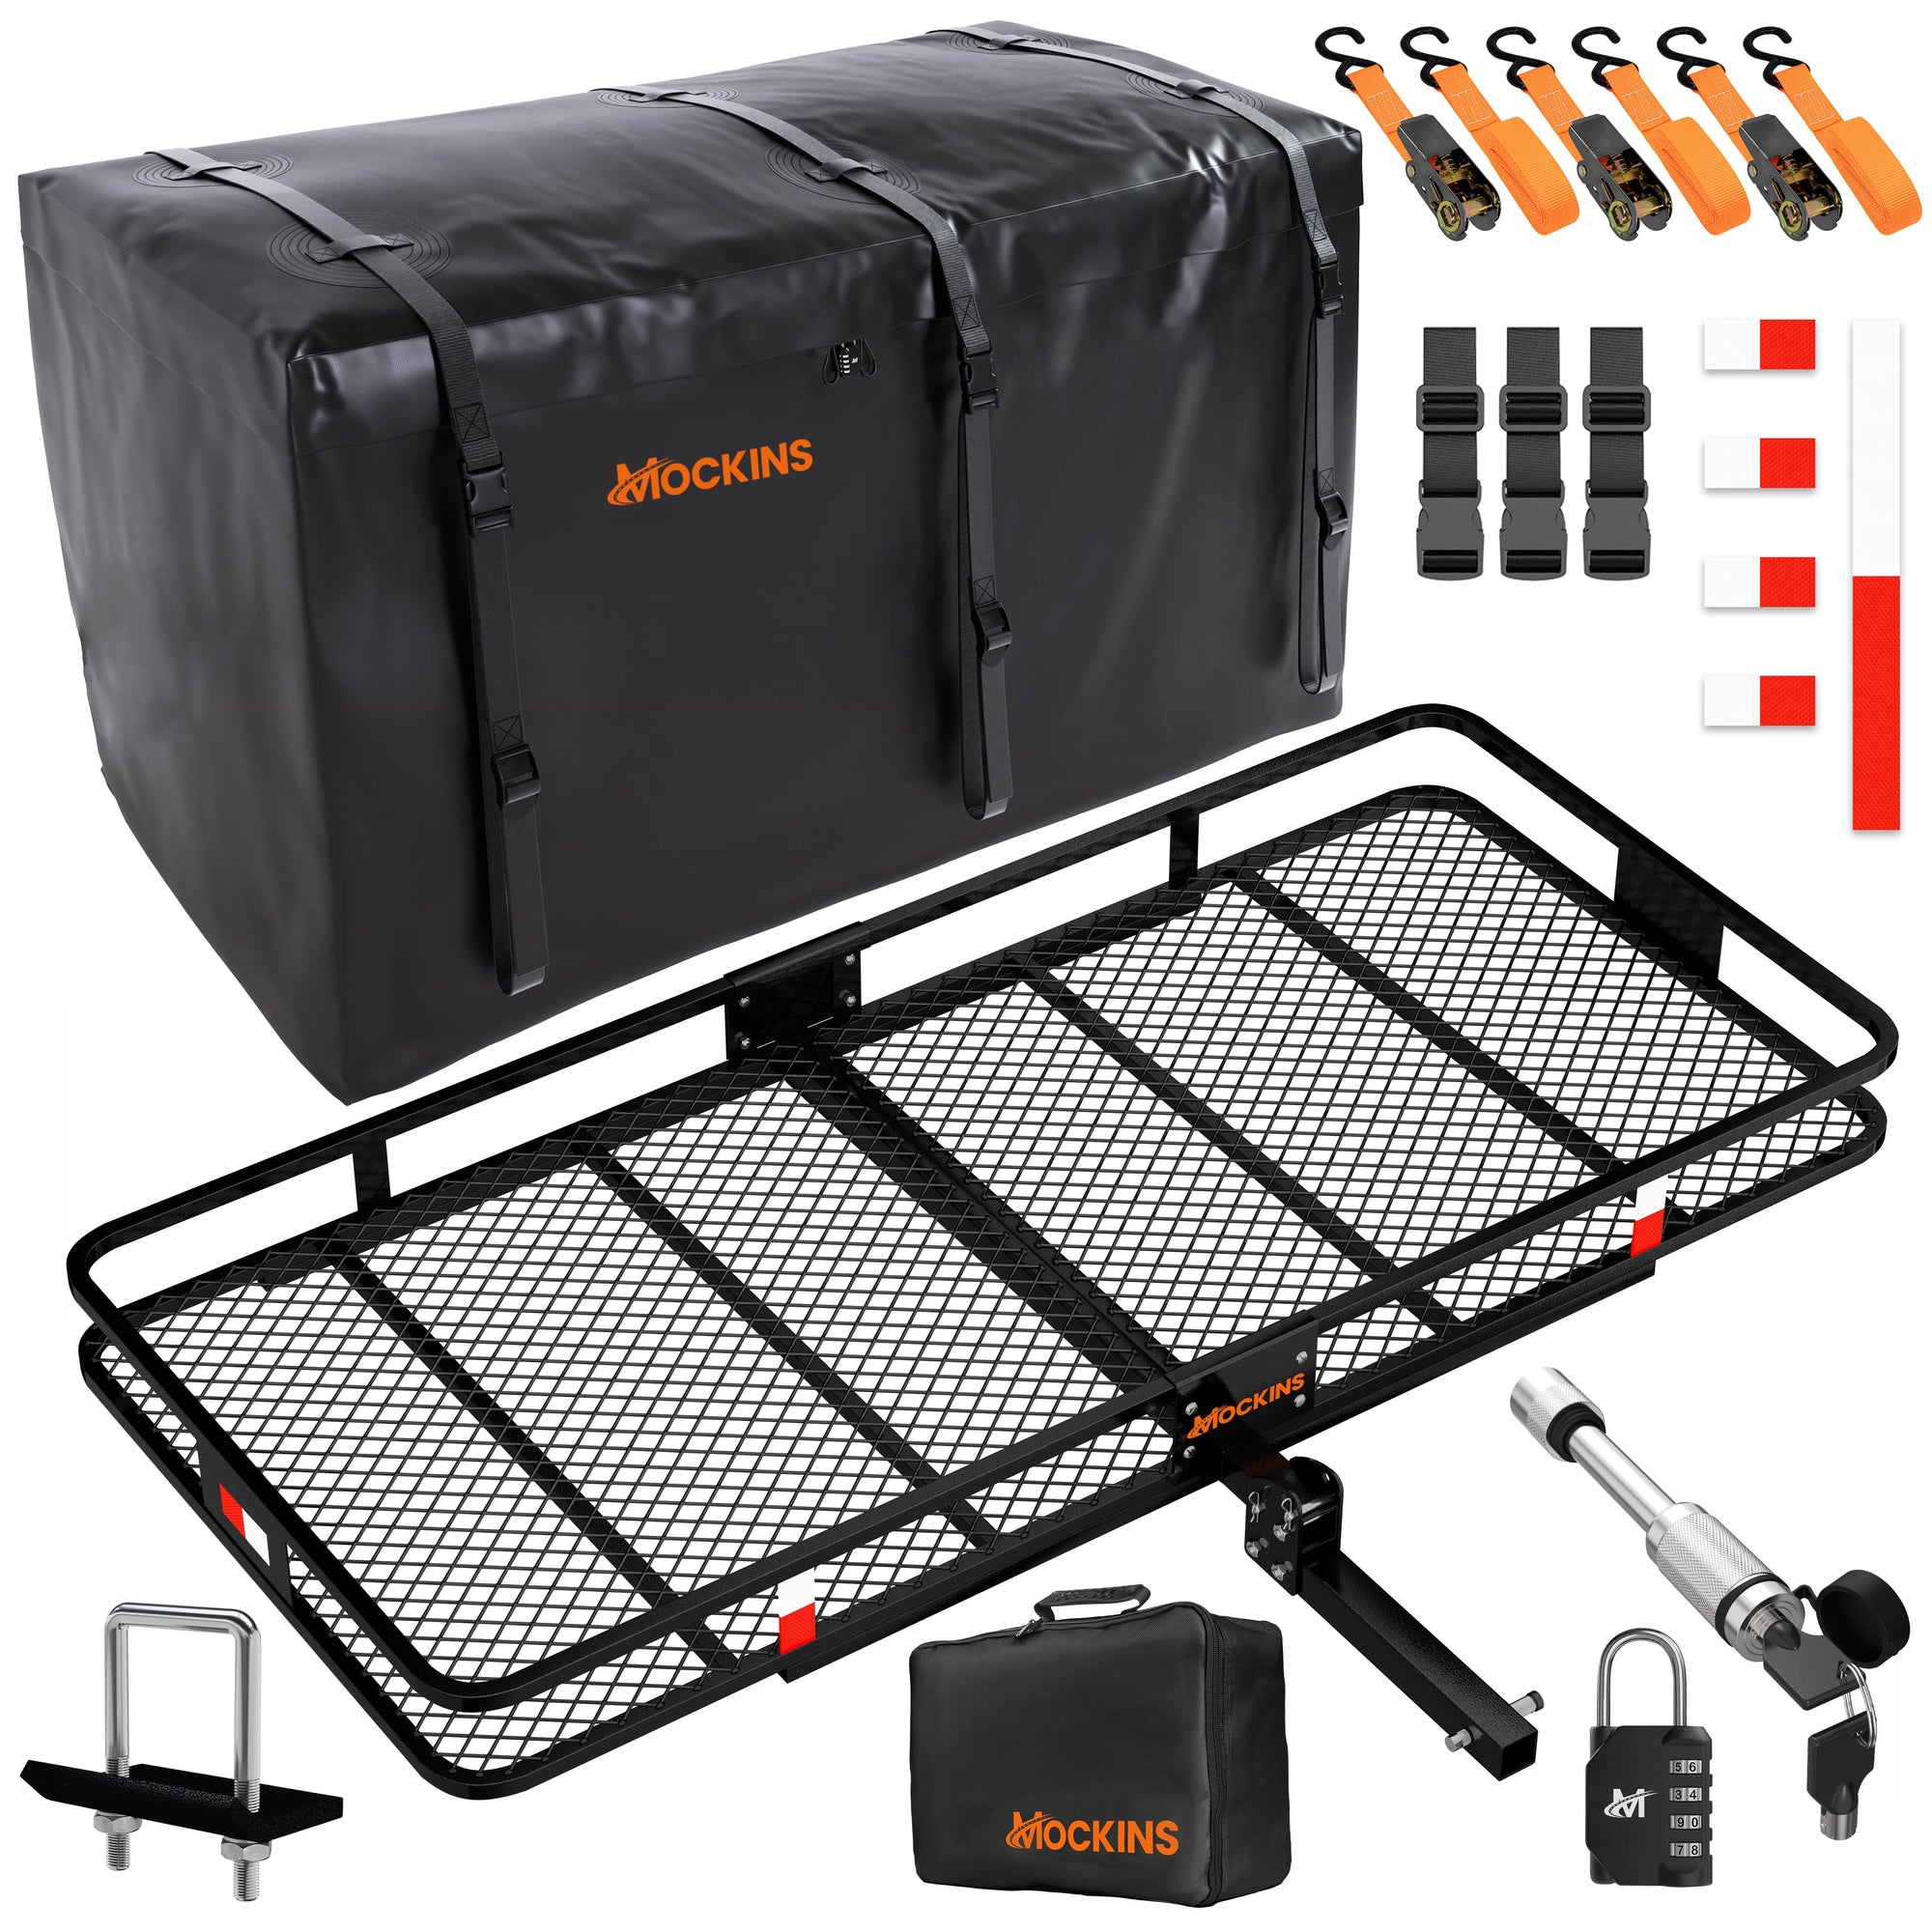 70" x 30"x 6" Hitch Mount Cargo Carrier with Carrier Bag | 500 Lbs Capacity XXL Basket with 40 Cu.Ft. Waterproof Bag